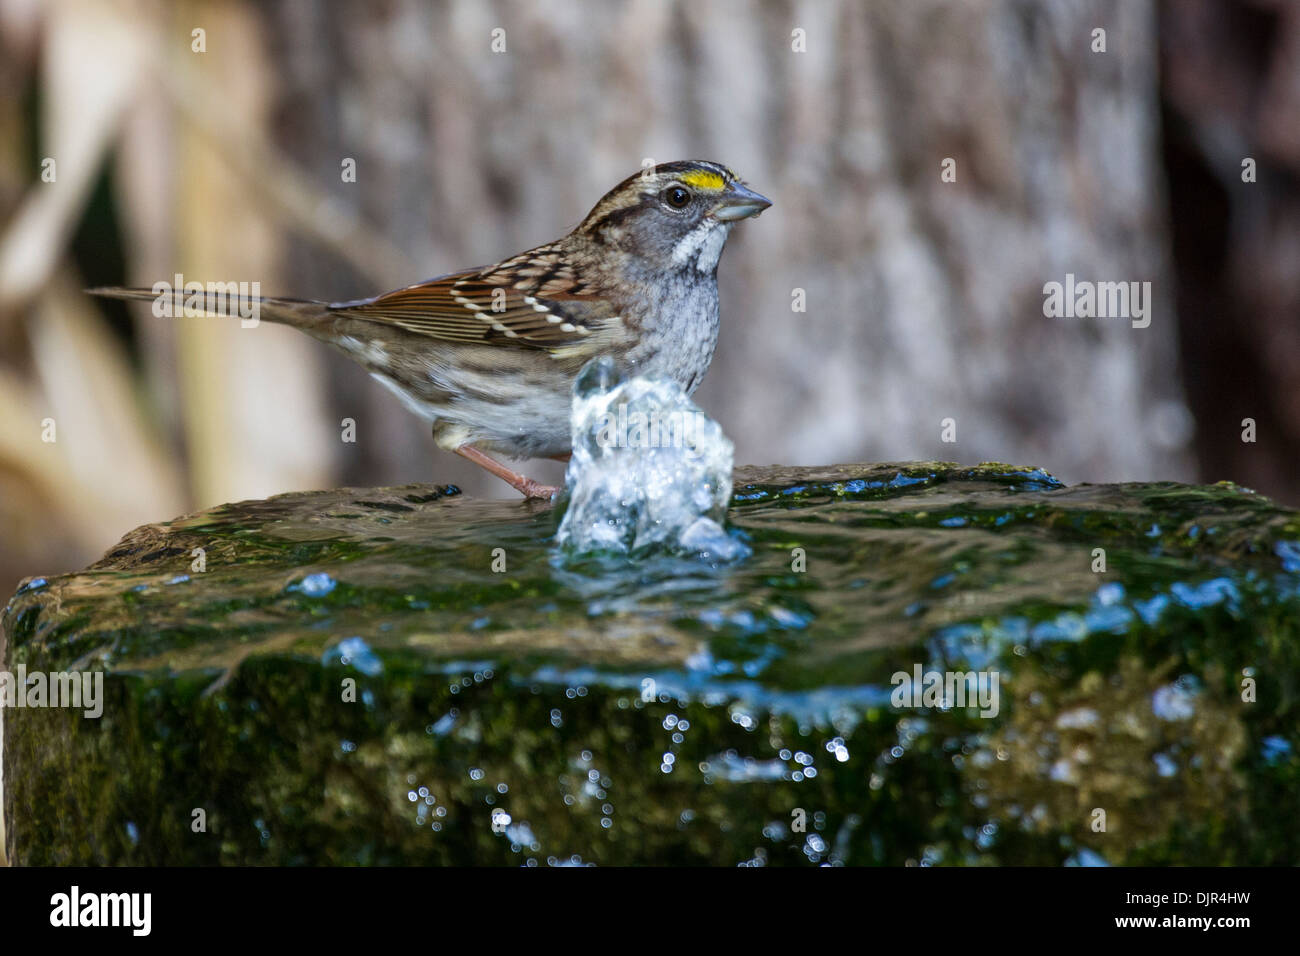 White-throated Sparrow, Zonotrichia albicollis, at water fountain in backyard wildlife habitat in McLeansville, North Carolina. Stock Photo